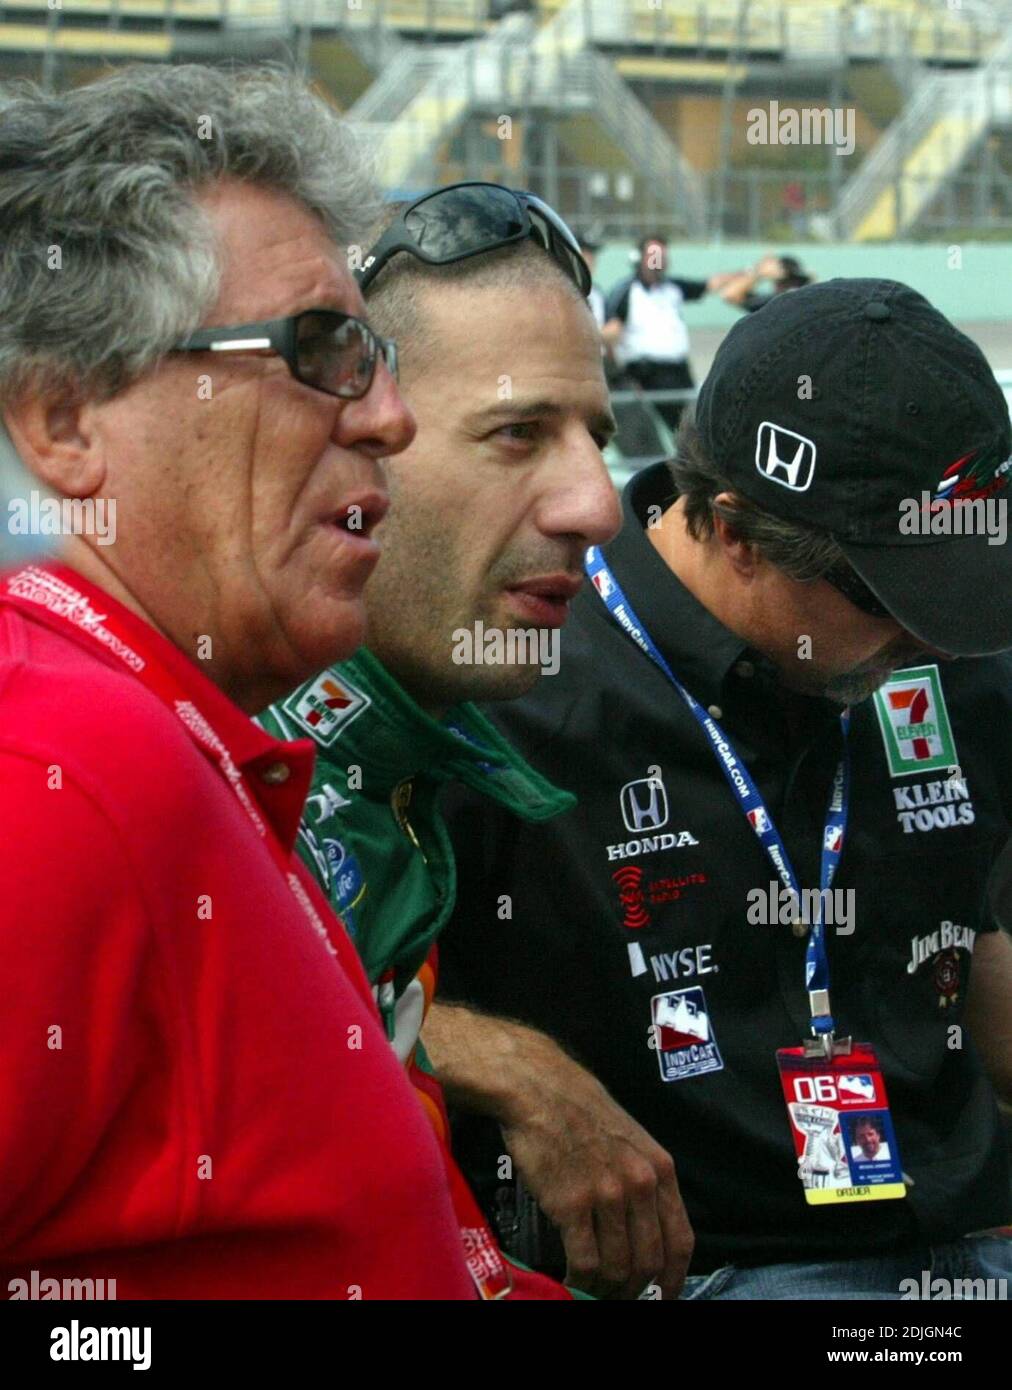 Mario Andretti and Tony Kanaan at Toyota Indy 300 weekend at Homestead Miami Speedway. Indy Pro Series Qualifying. 03/24/06 Stock Photo